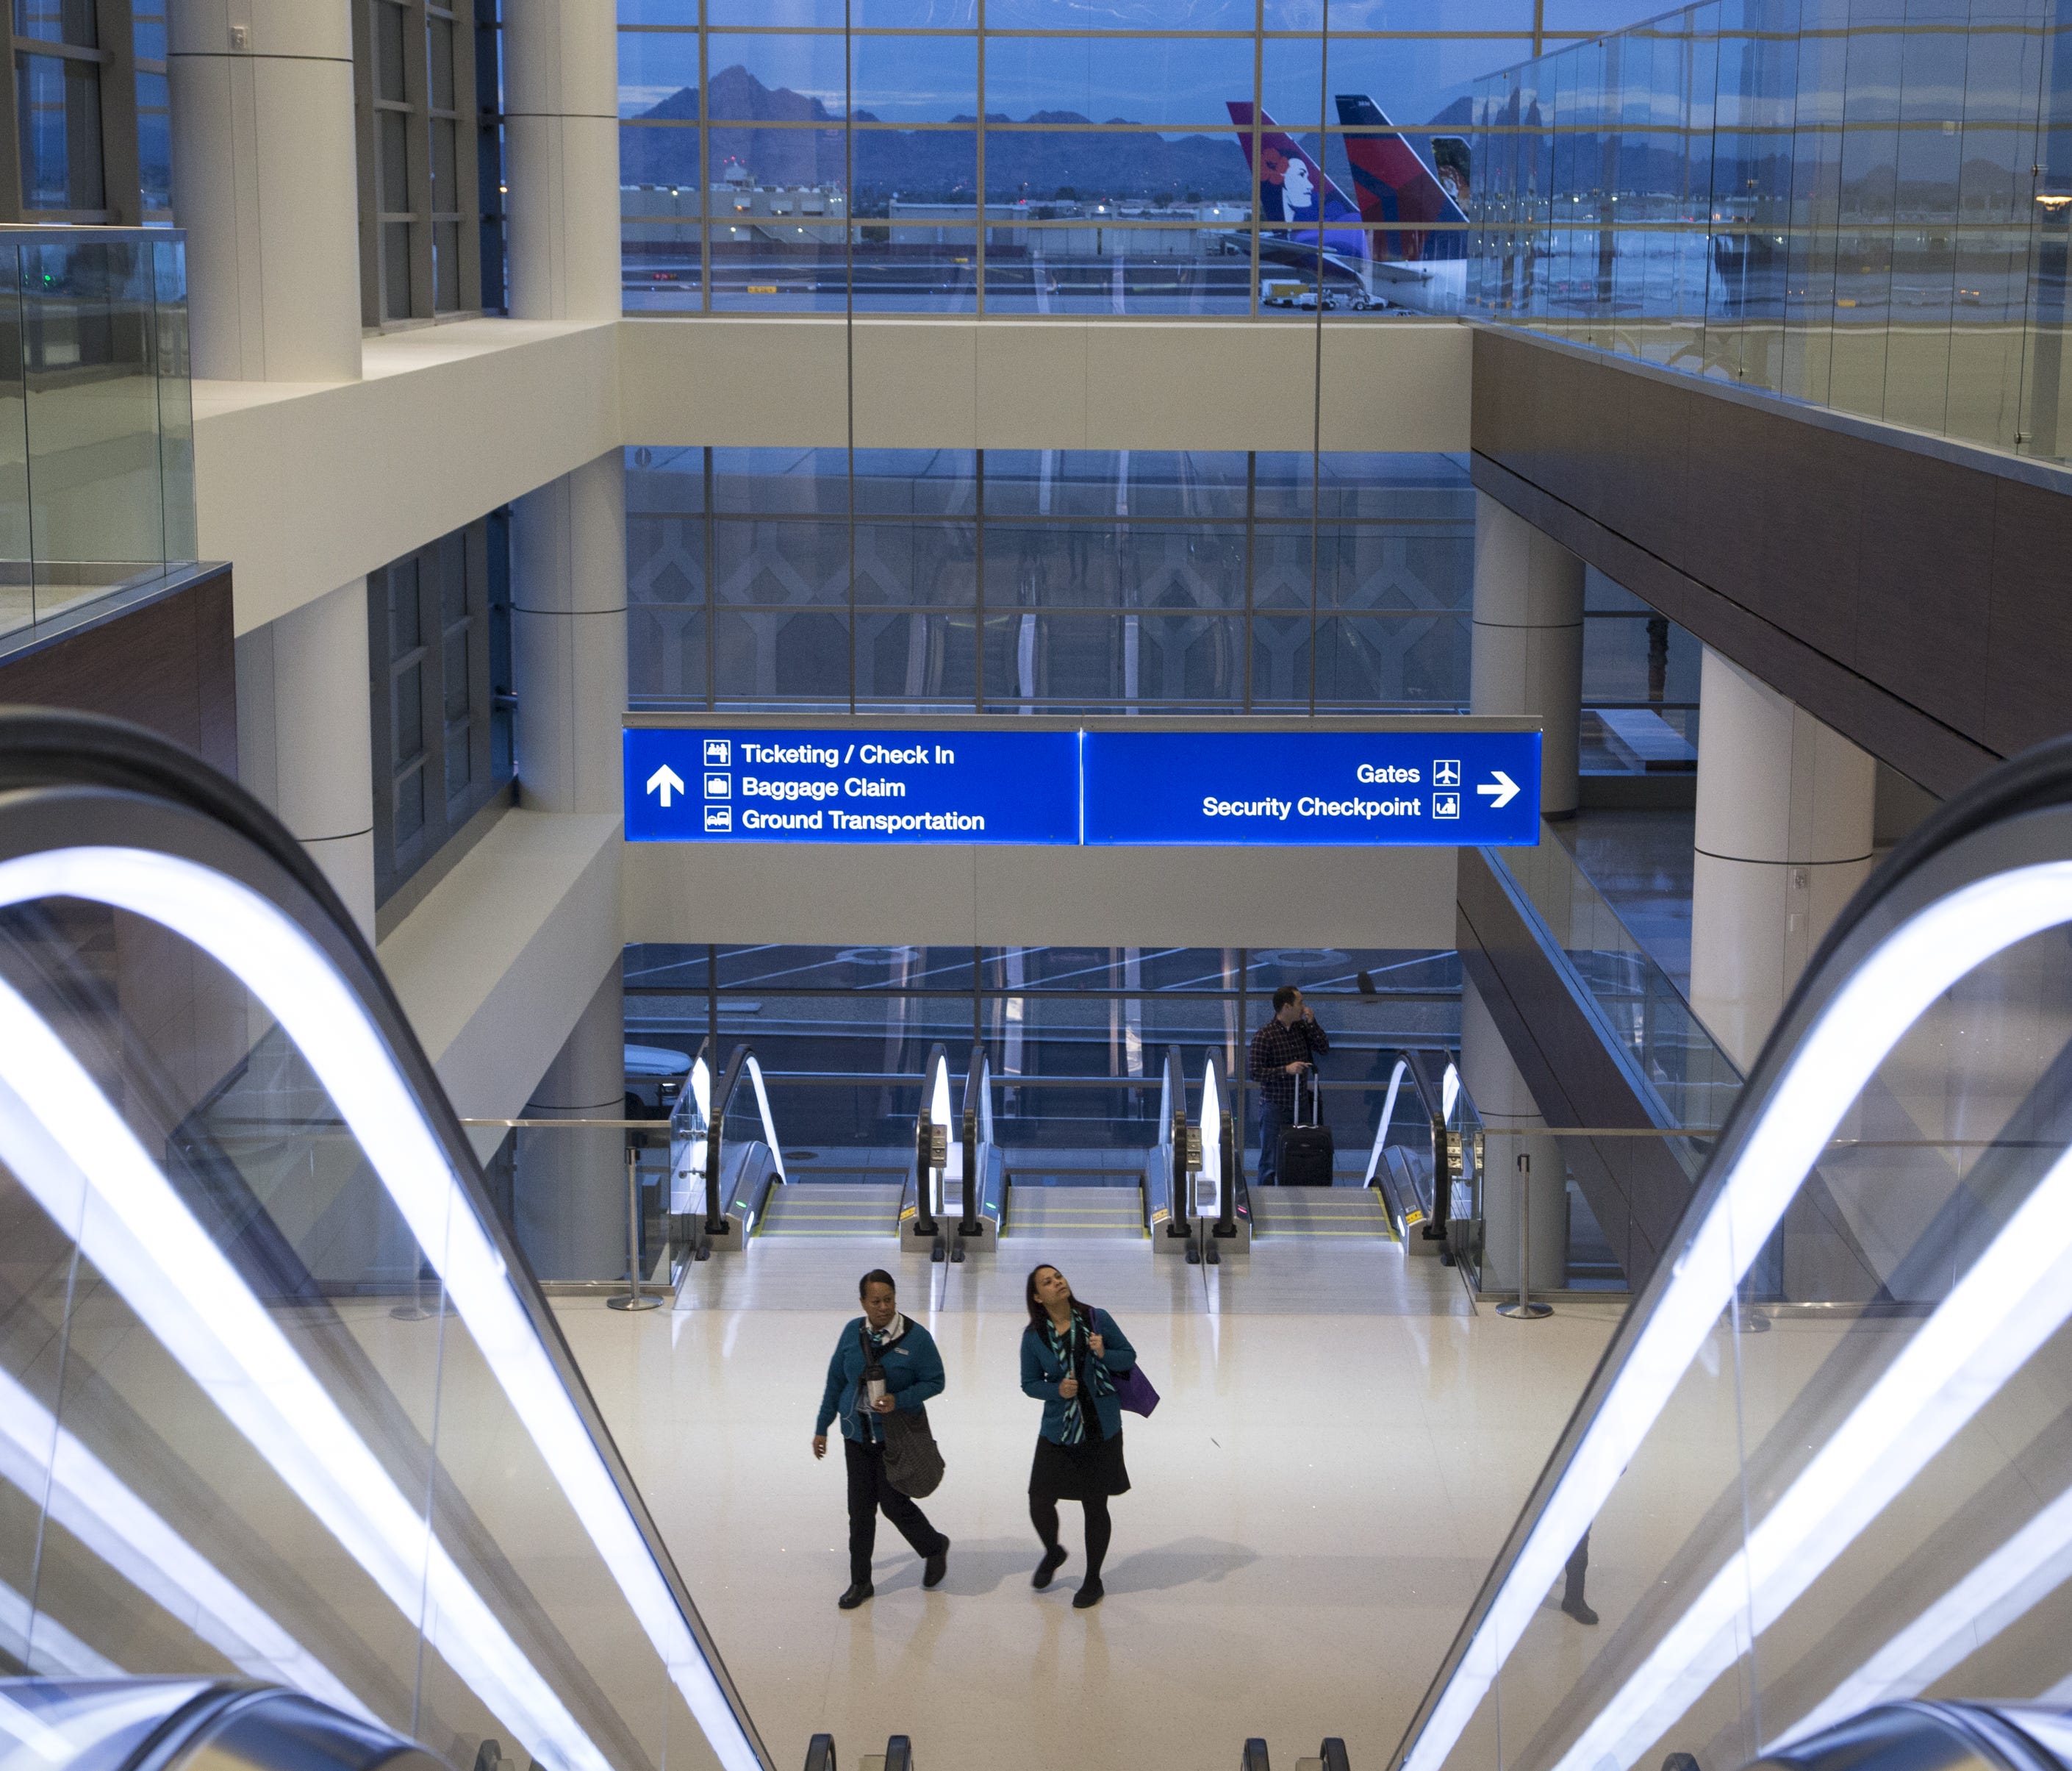 Phoenix Sky Harbor International Airport's Terminal 3 opened today, December 6, 2016, after it's first phase makeover in Phoenix.